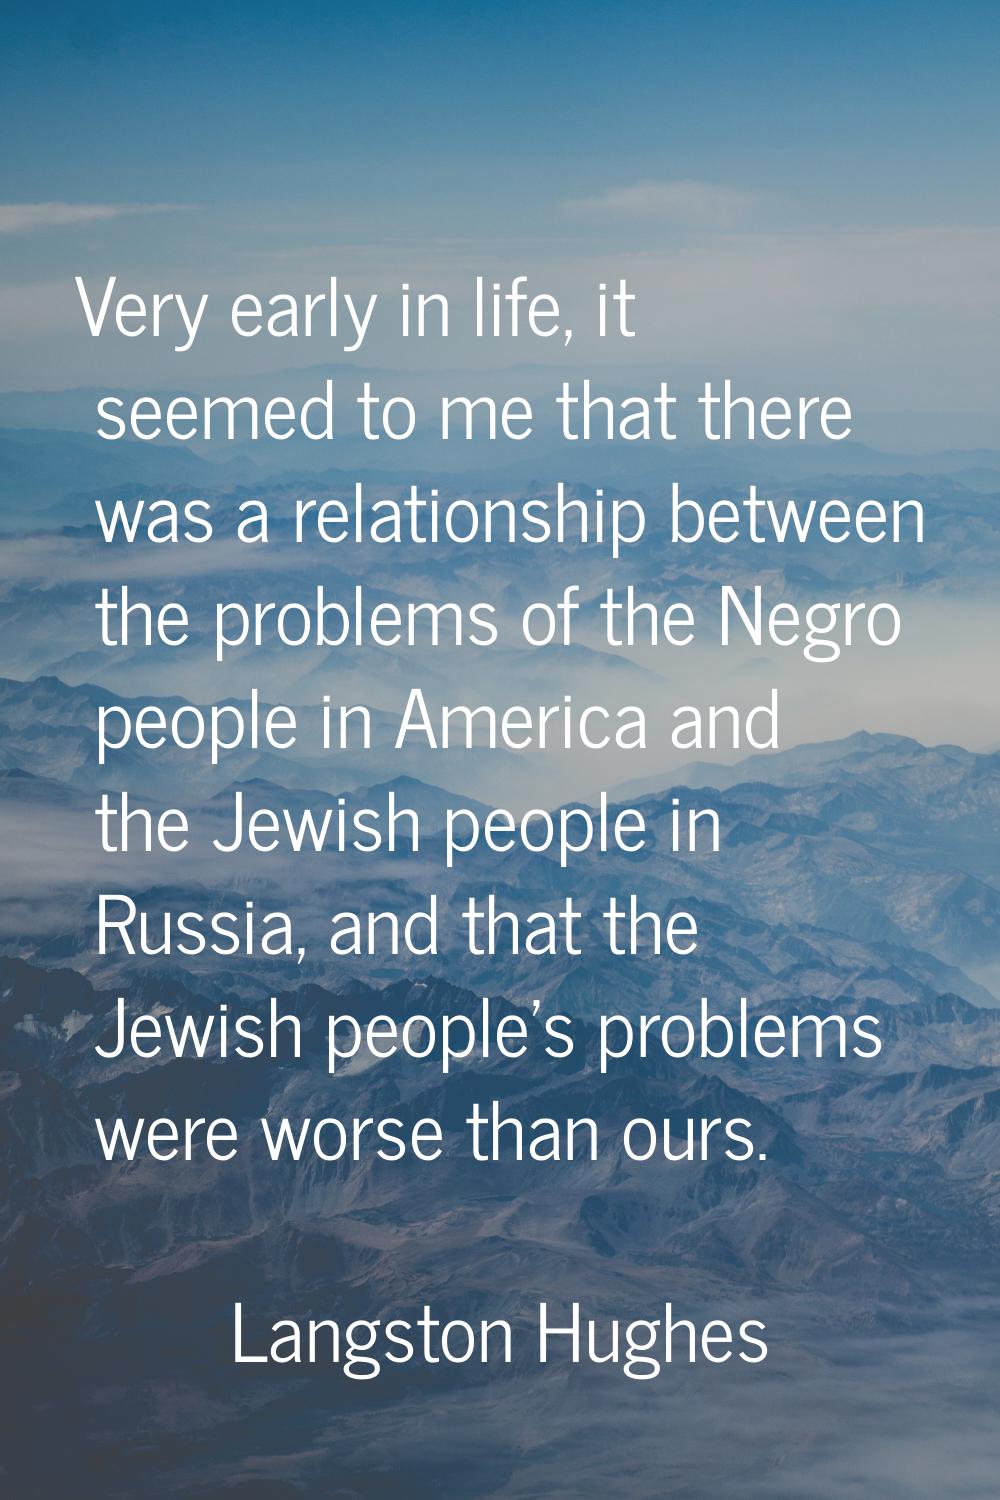 Very early in life, it seemed to me that there was a relationship between the problems of the Negro